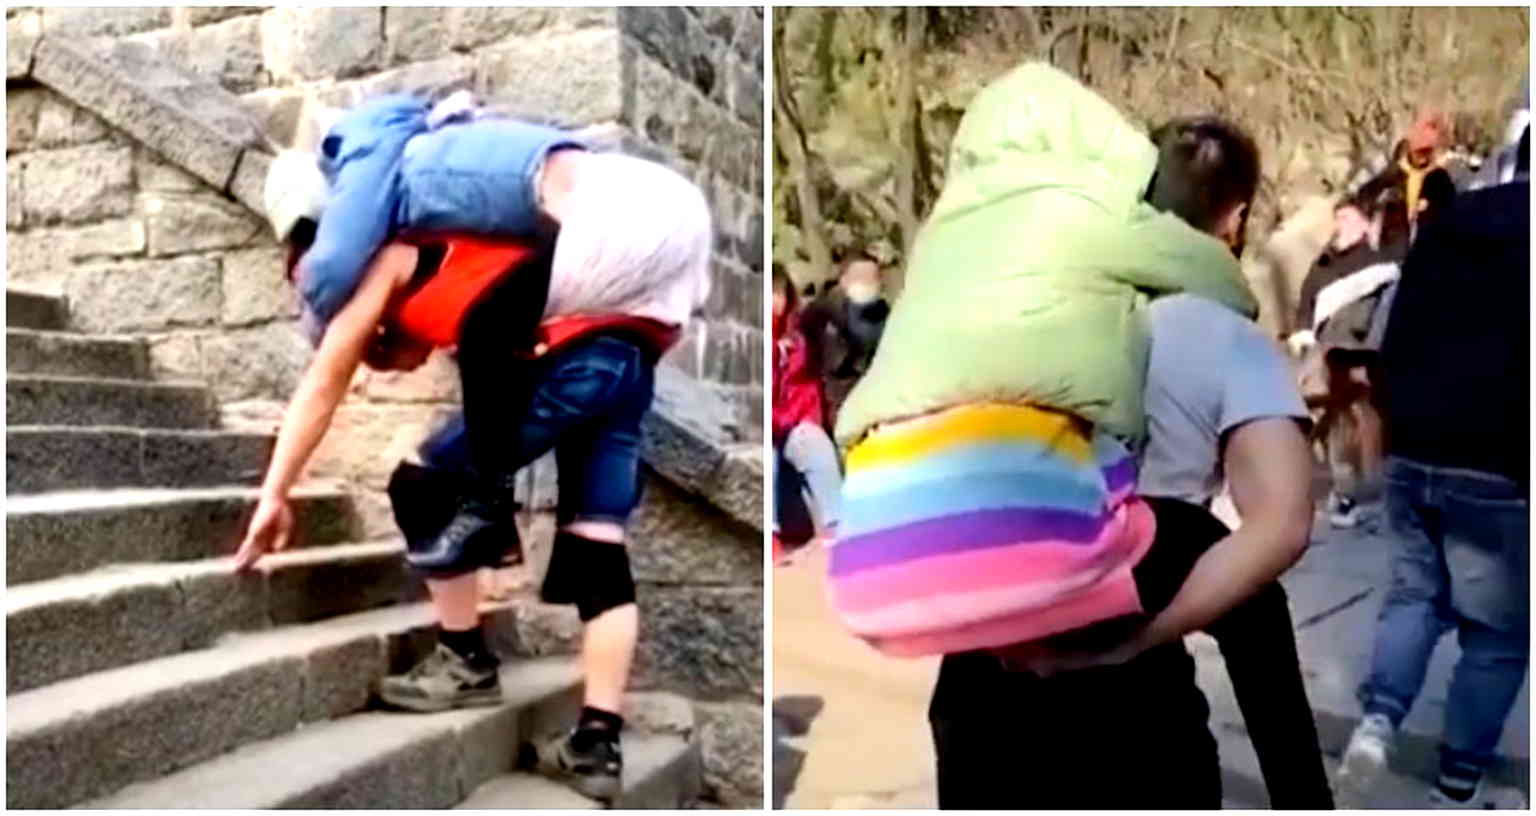 Chinese husband carries paralyzed wife on his back 12 hours up mountain as symbol of their love’s strength